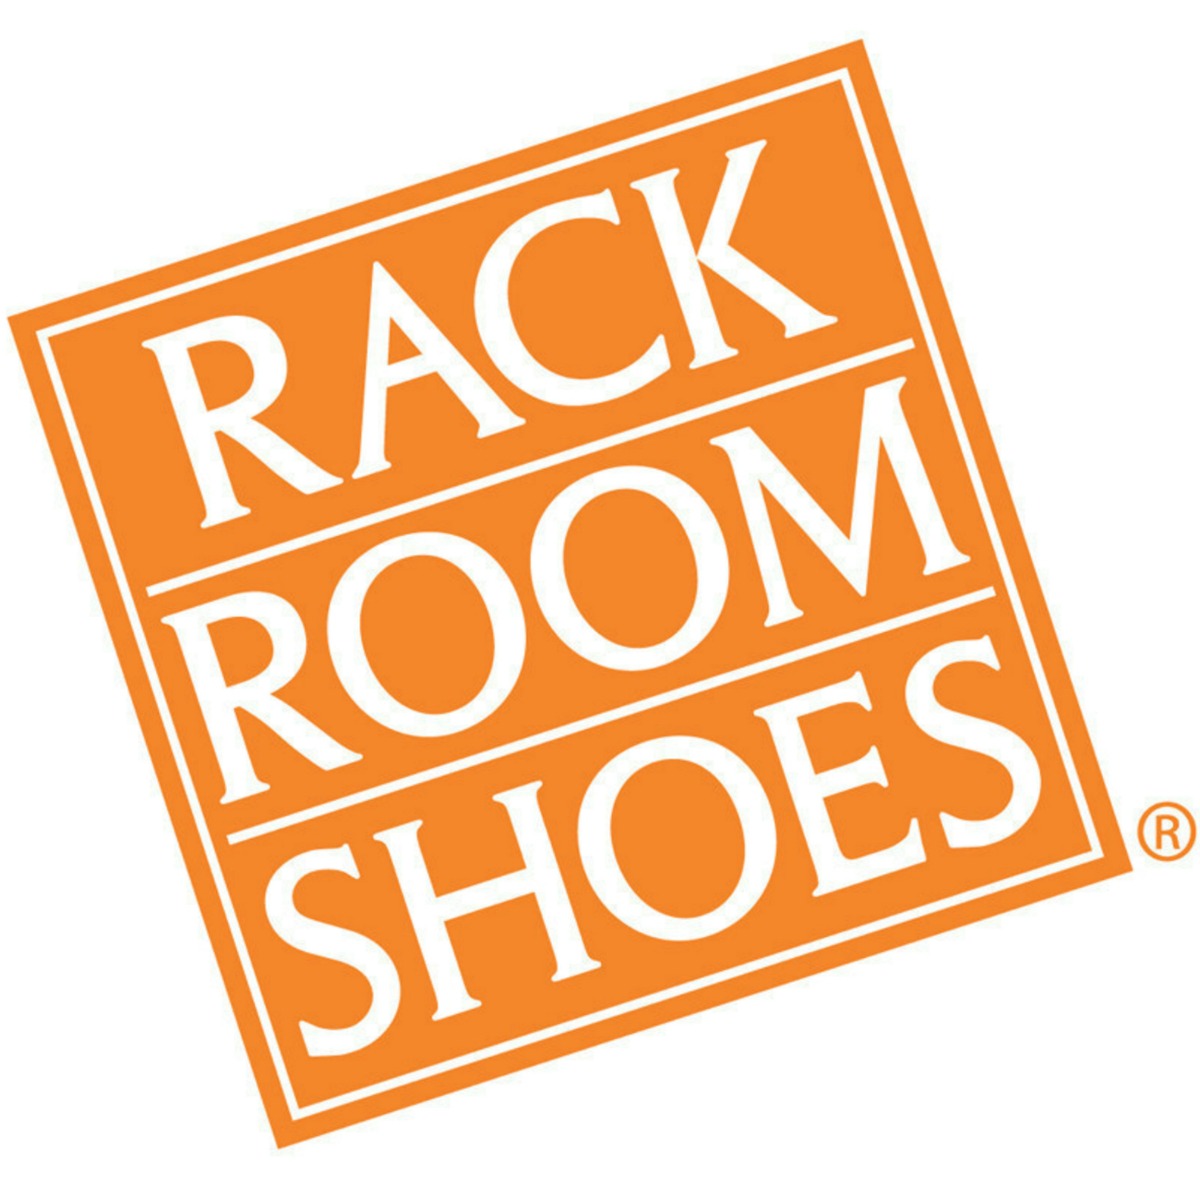 Rack Room Shoes 2020 Black Friday Ad Frugal Buzz